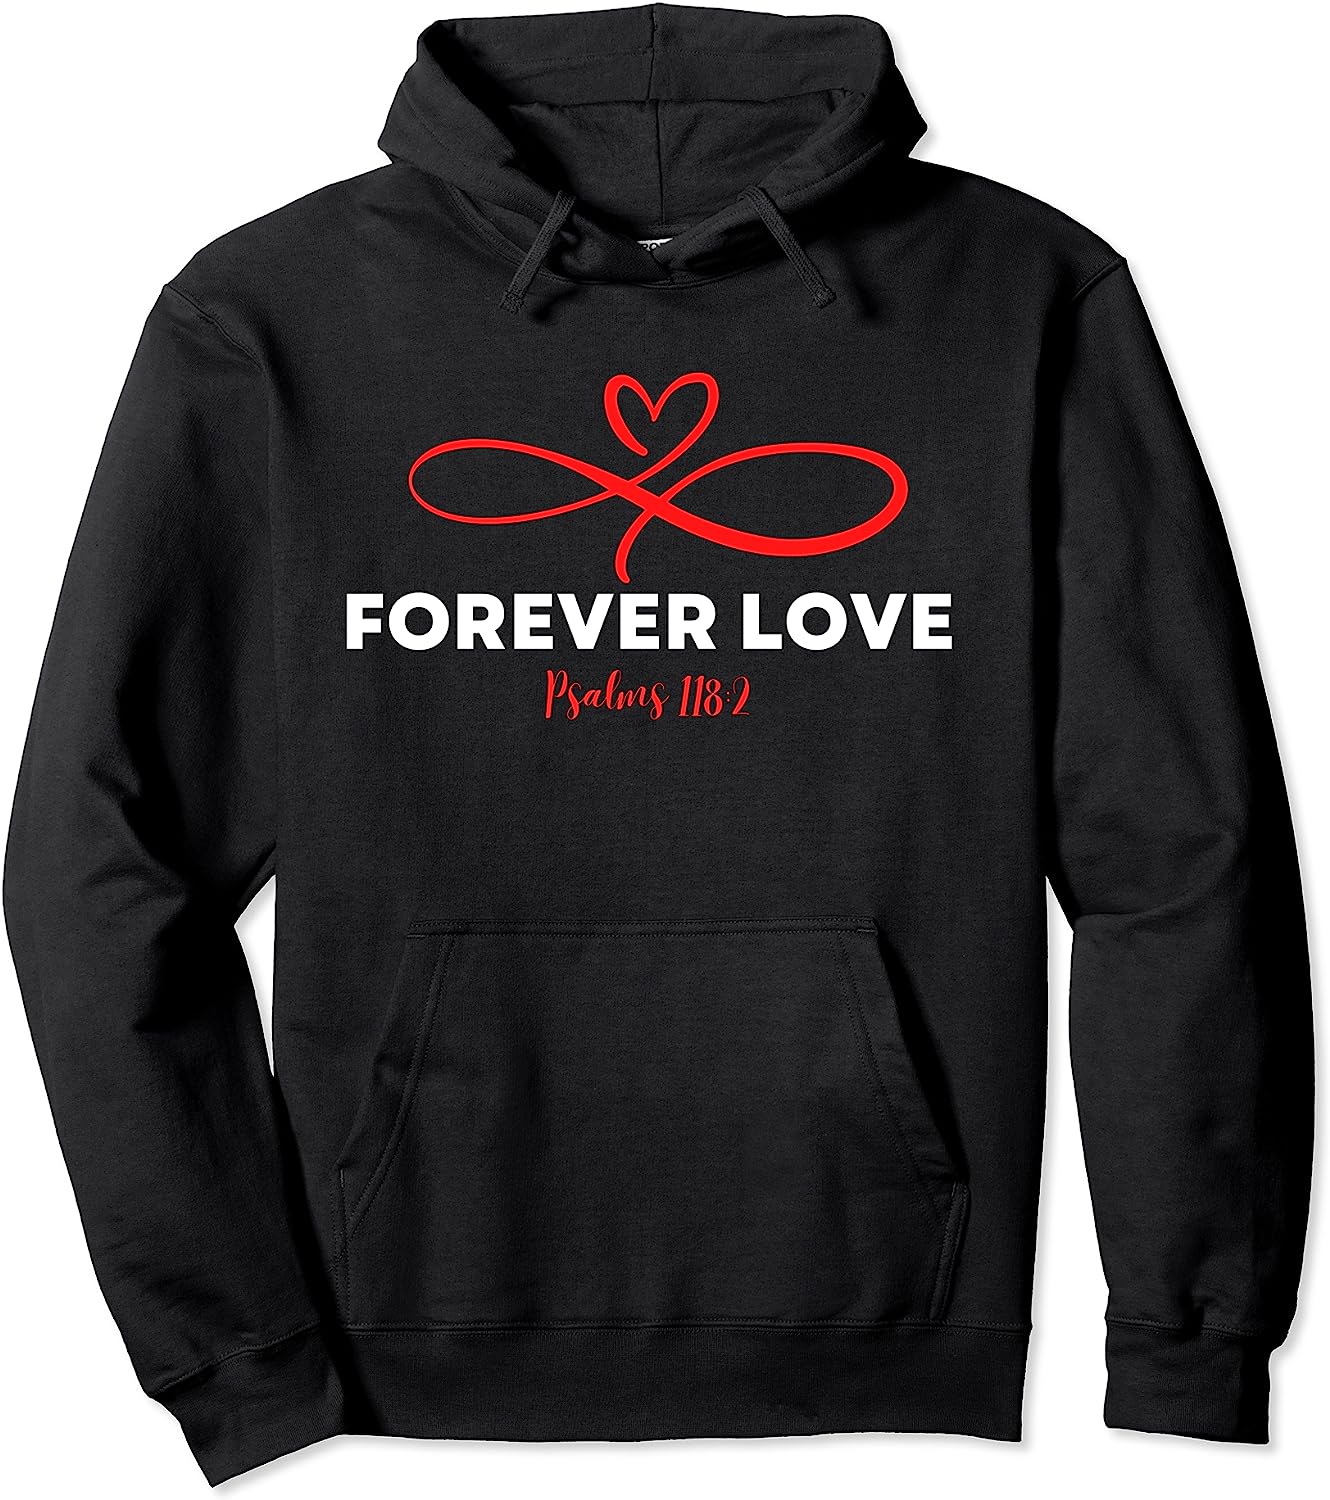 Forever Love - Pullover Hoodie - Fun and Inspirational Design by Crucial Key